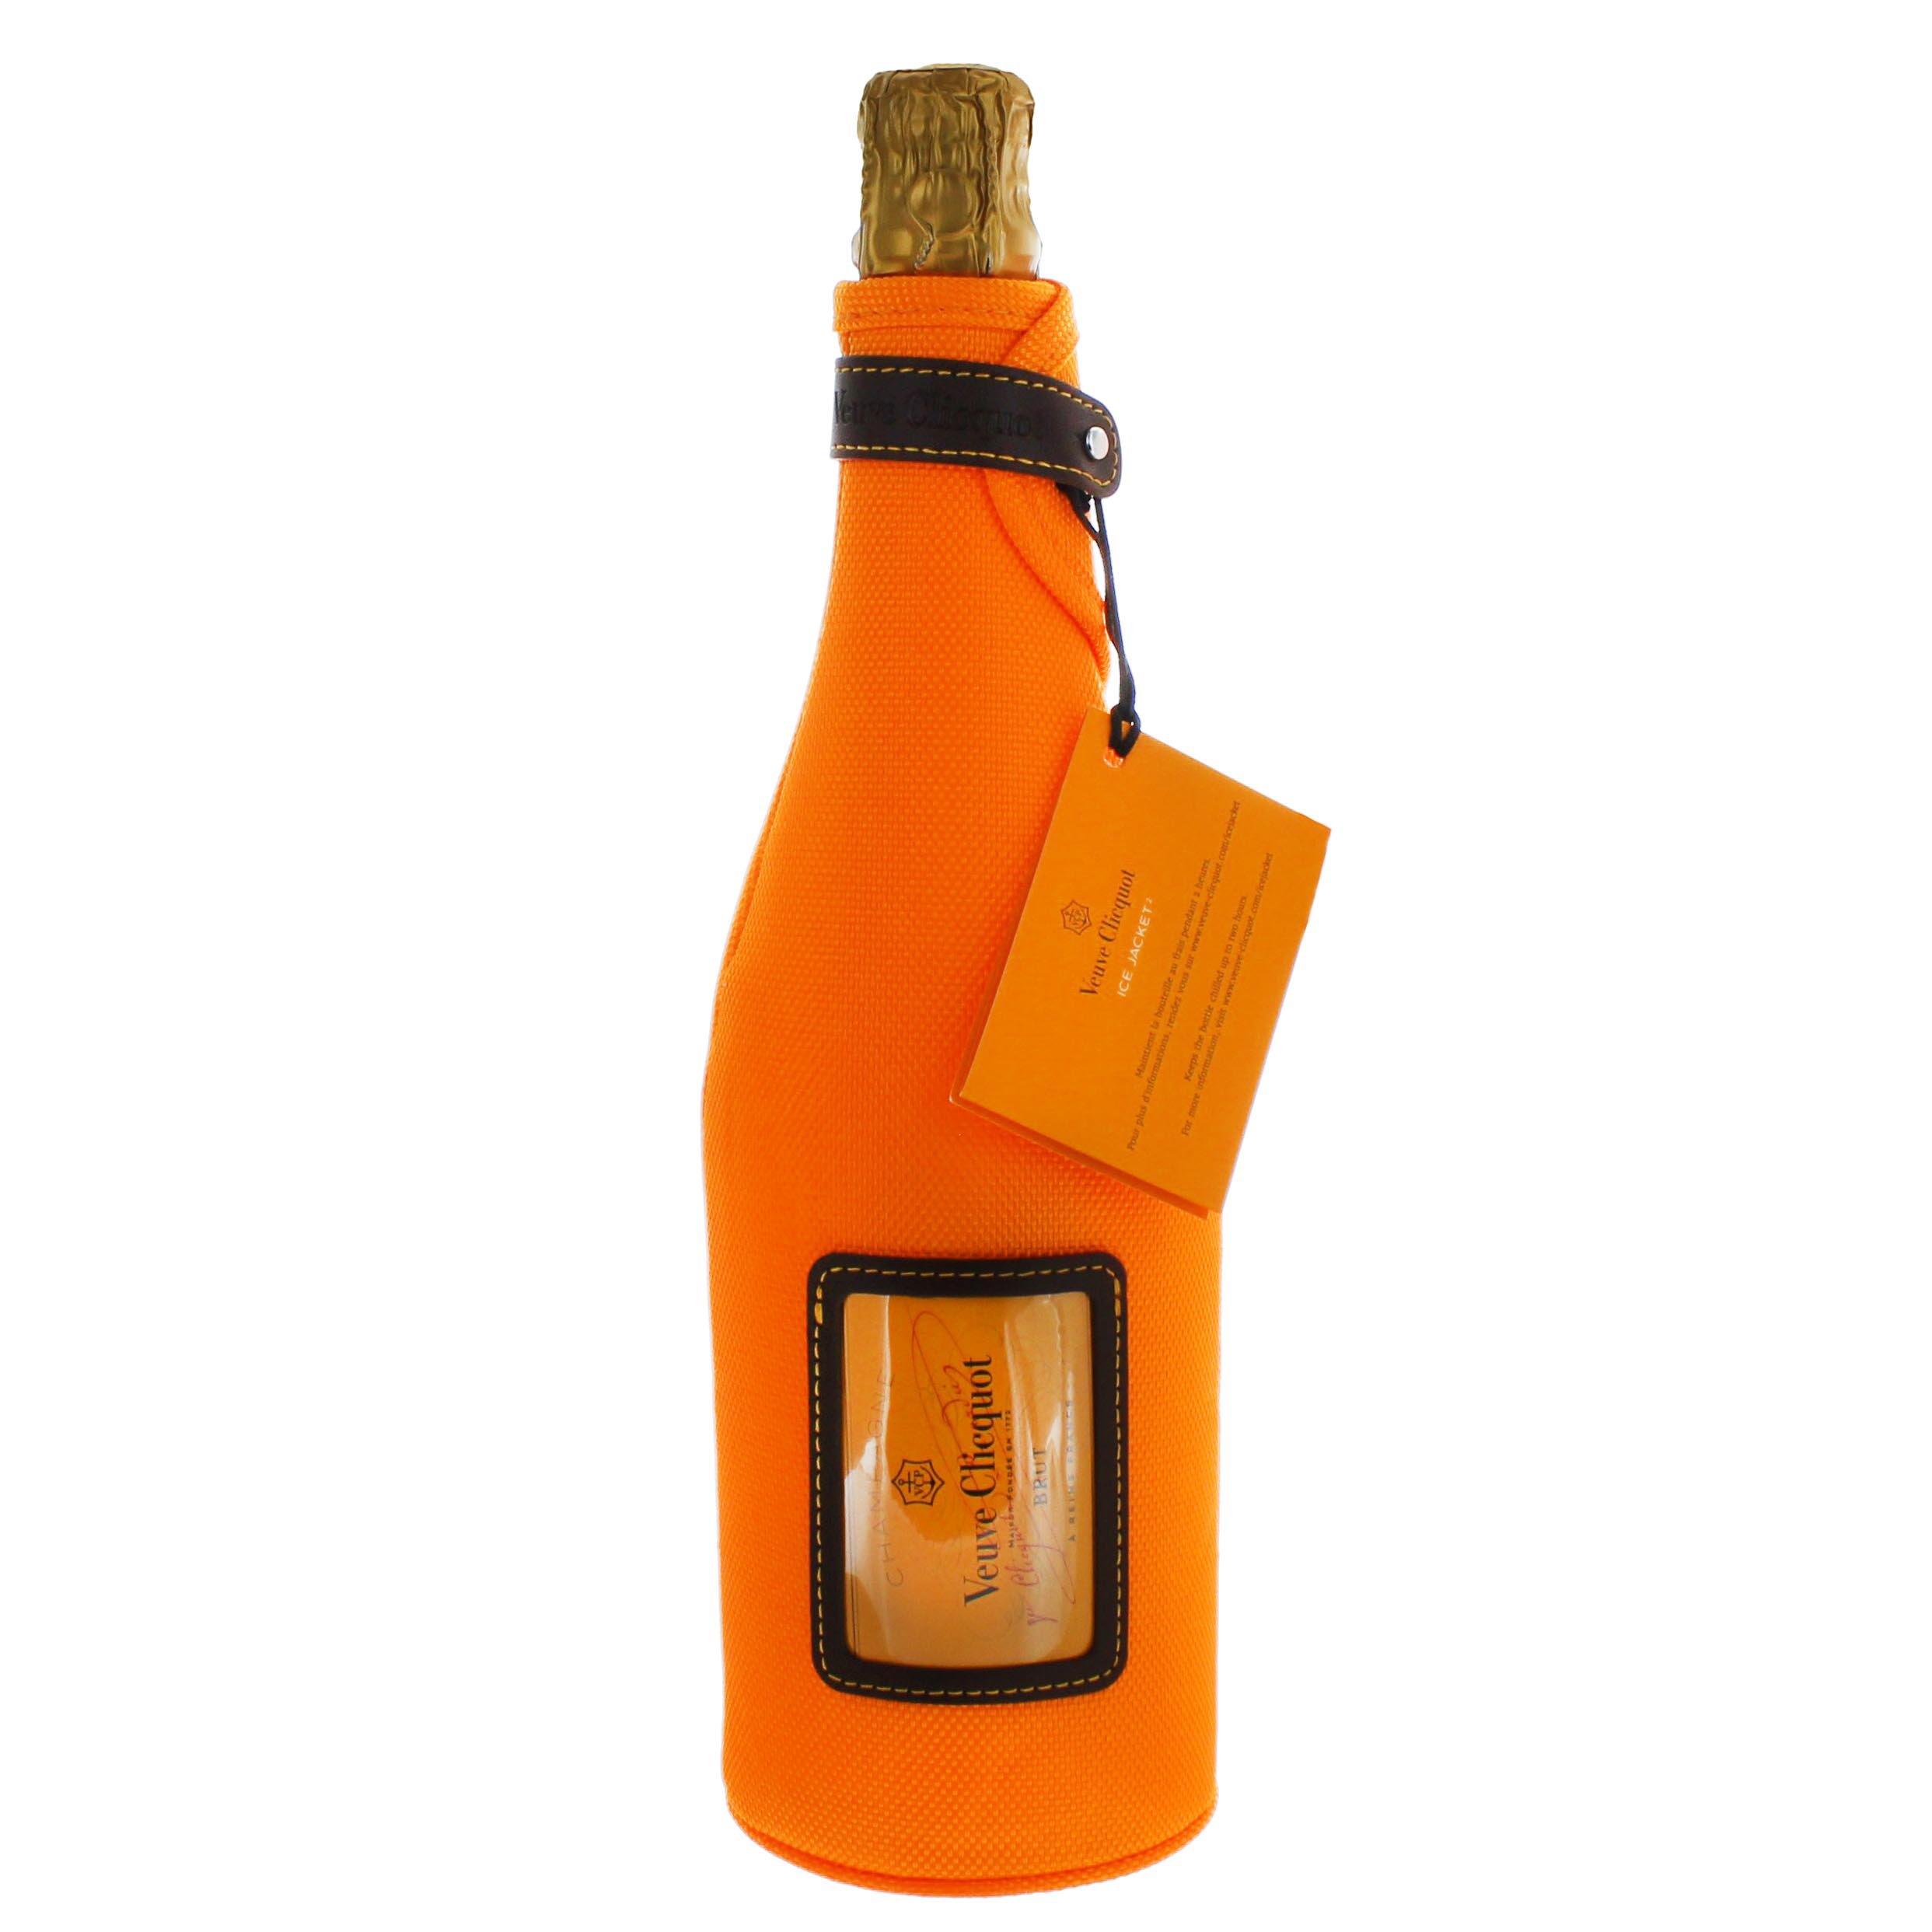 Veuve Clicquot Brut with Ice Jacket - Shop Wine at H-E-B